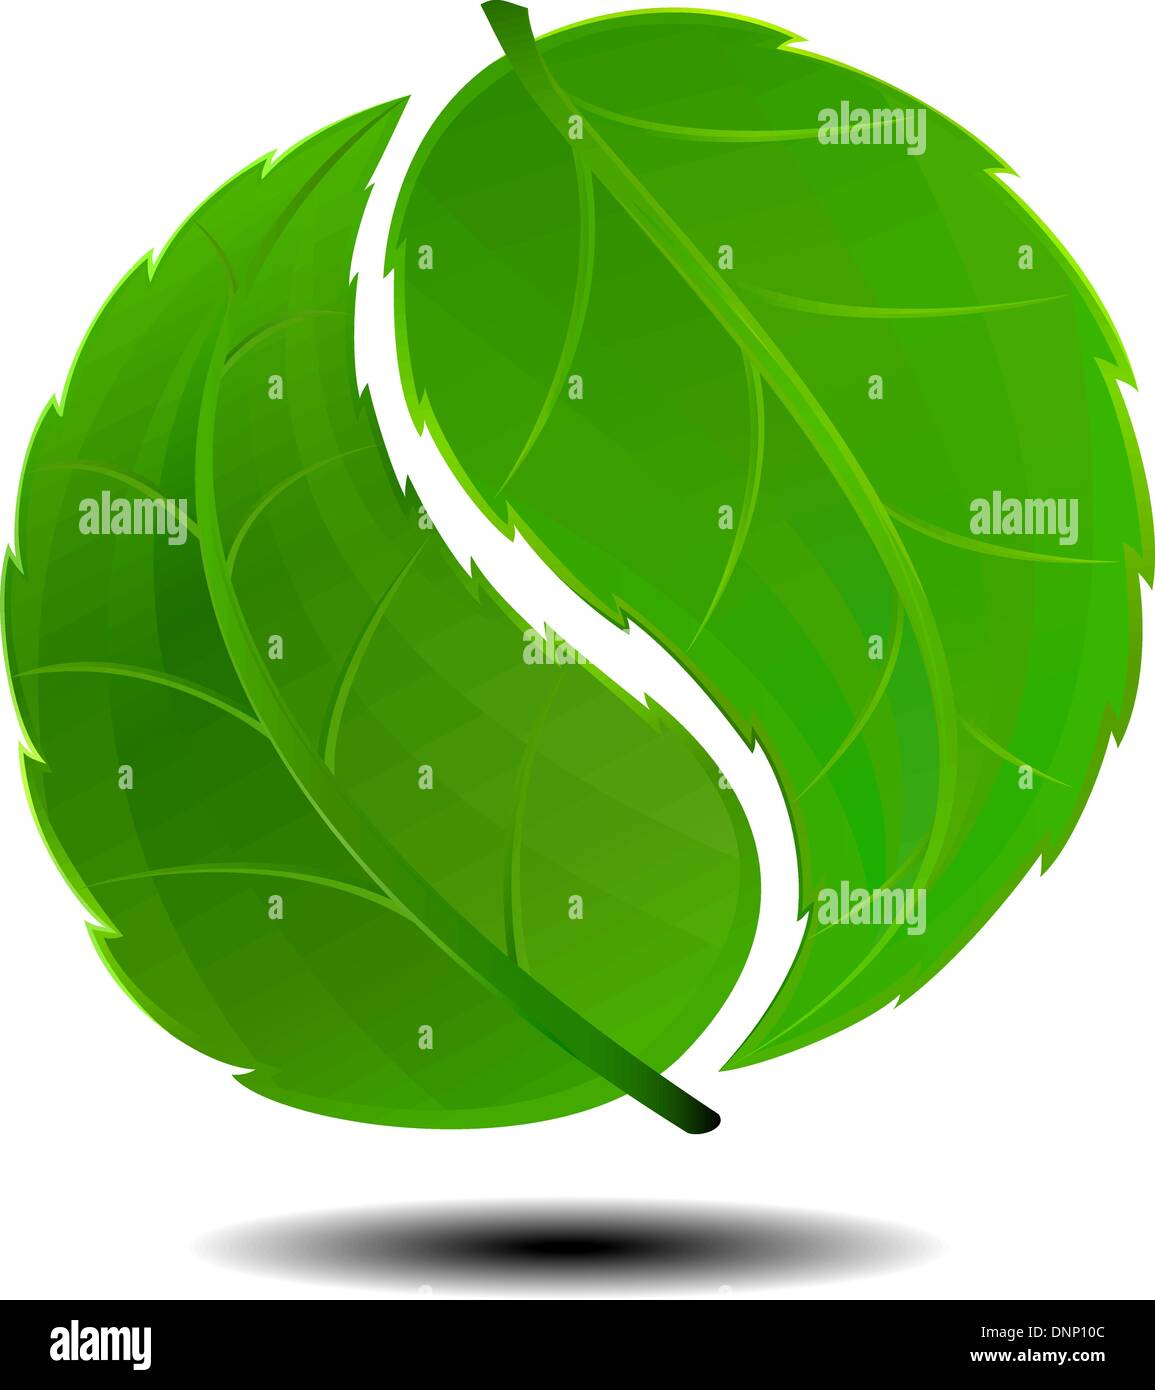 Green logo concept using Yin Yang in a leaf design Stock Vector